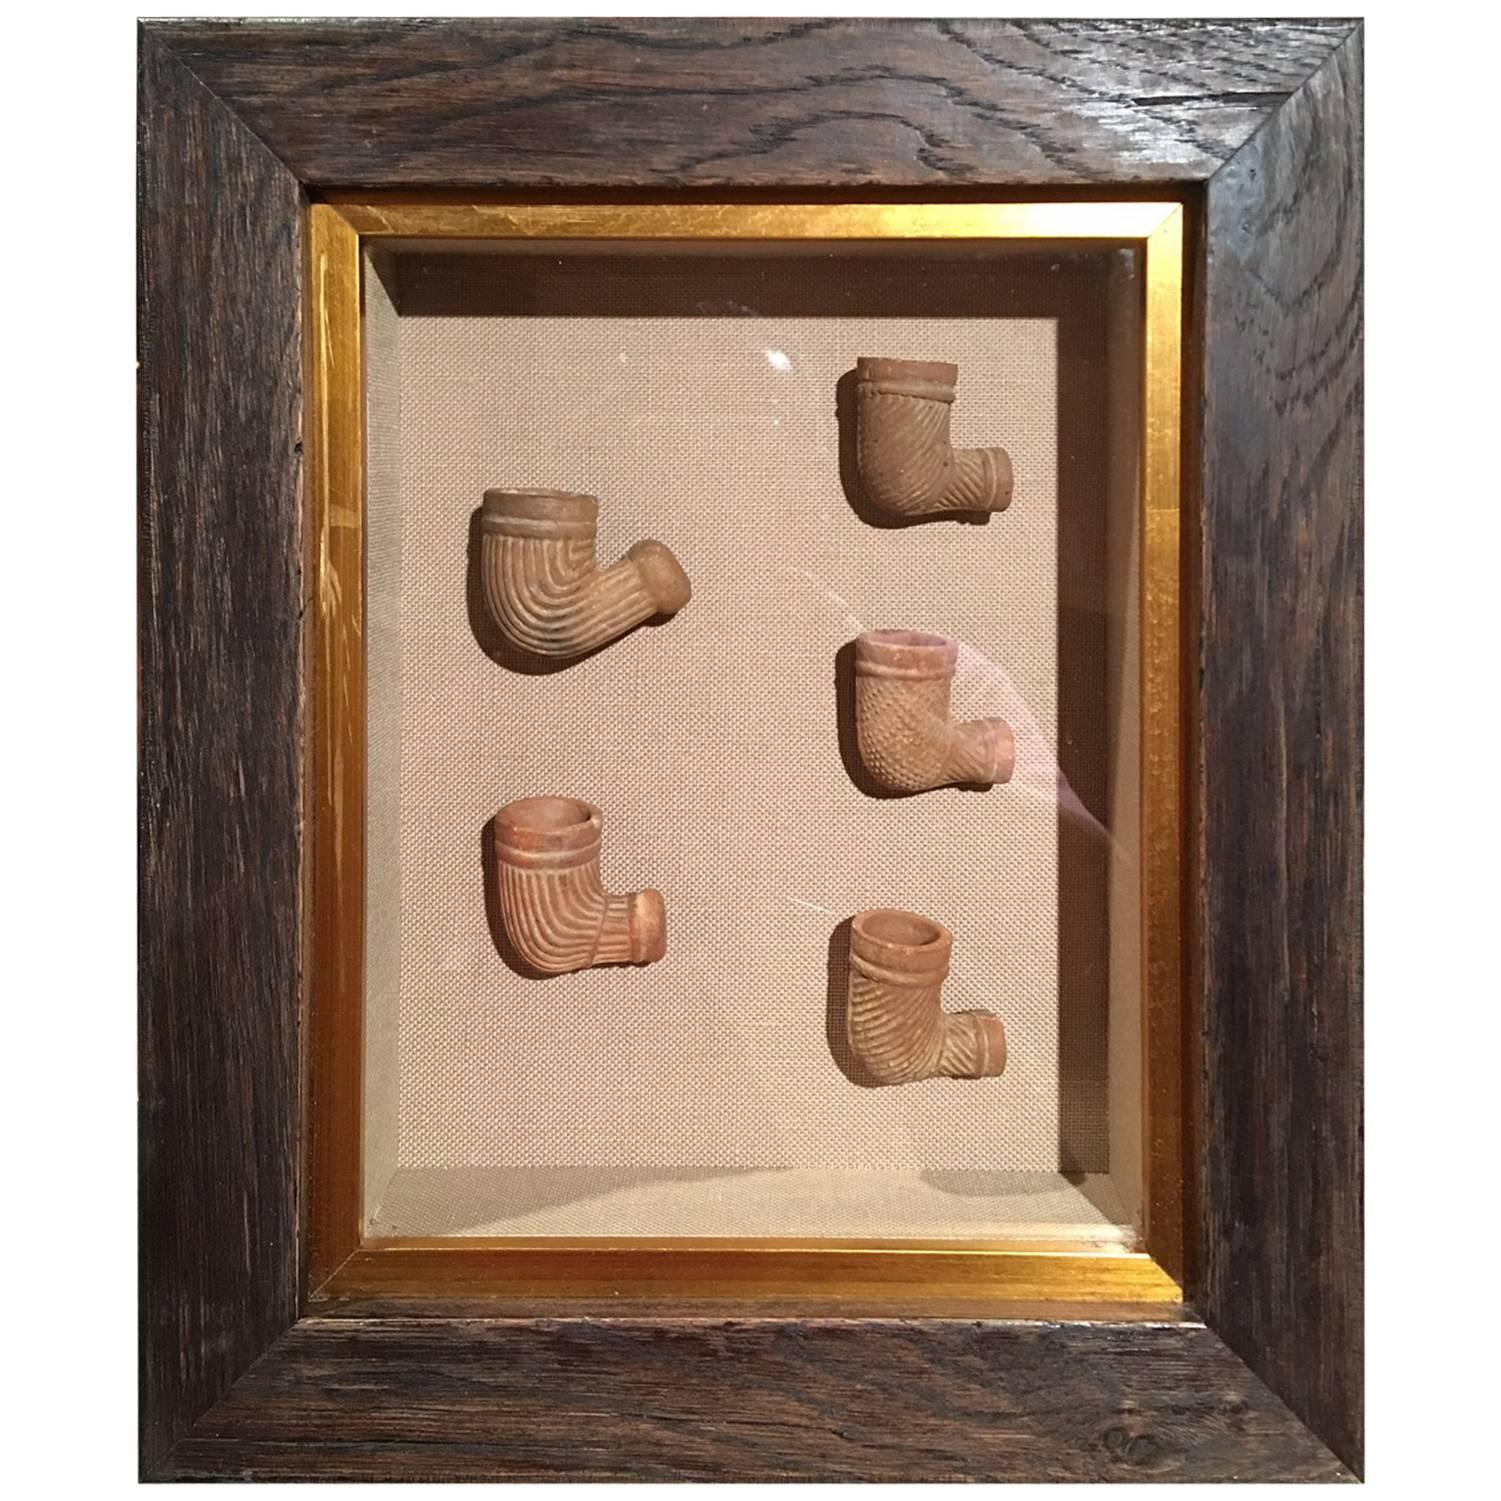 Set of Five Terracotta Pipes Framed in a Shadow Box, 19th Century